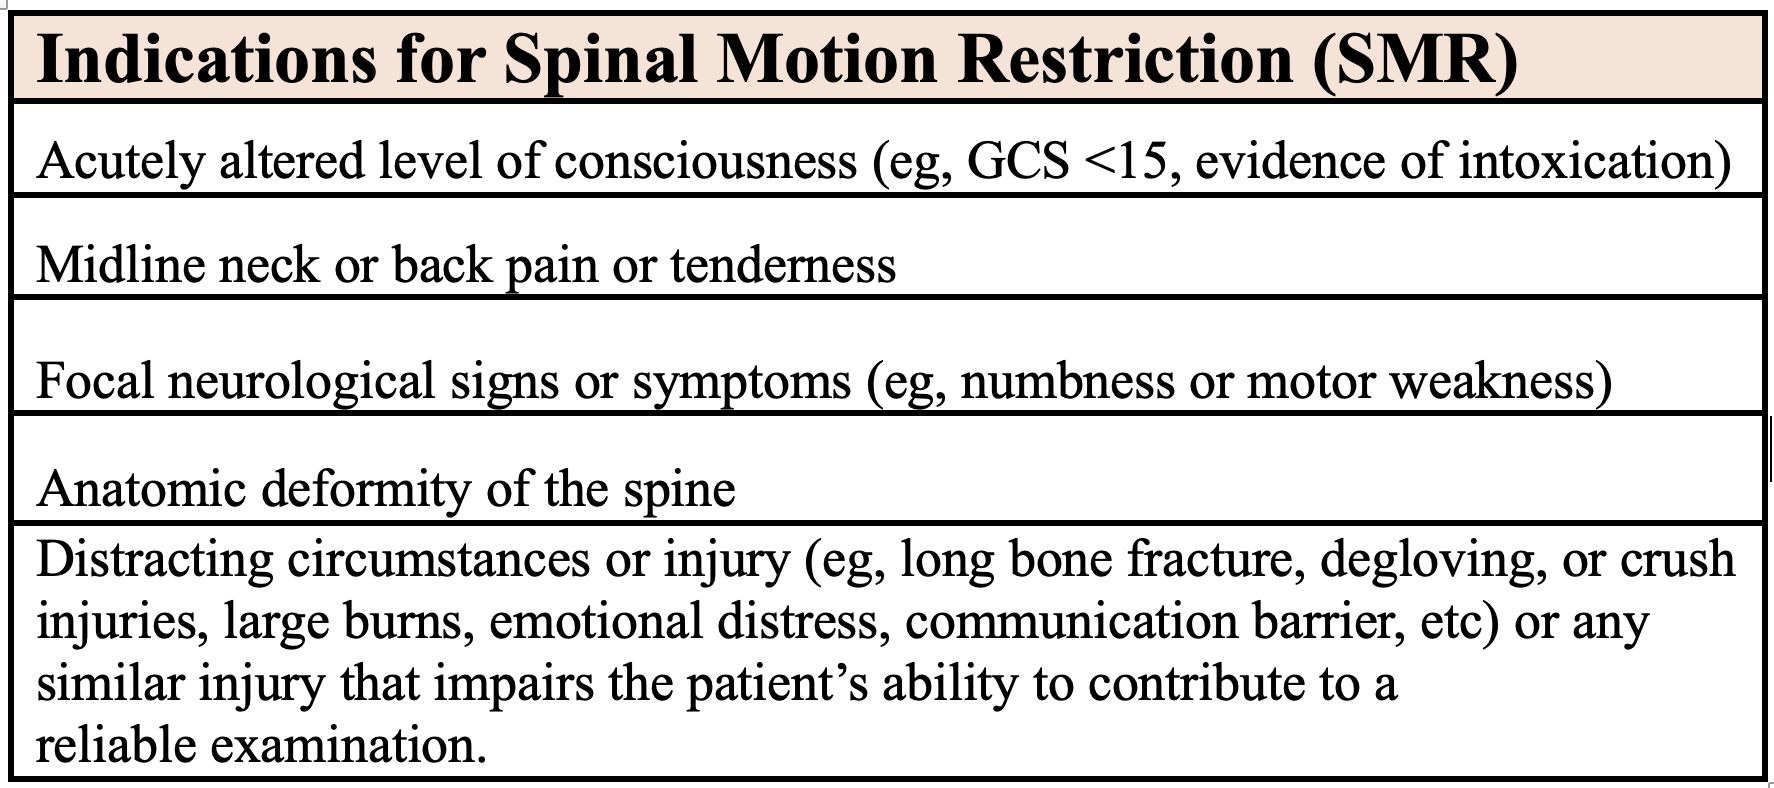 <p>Indications for Spinal Motion Restriction</p>